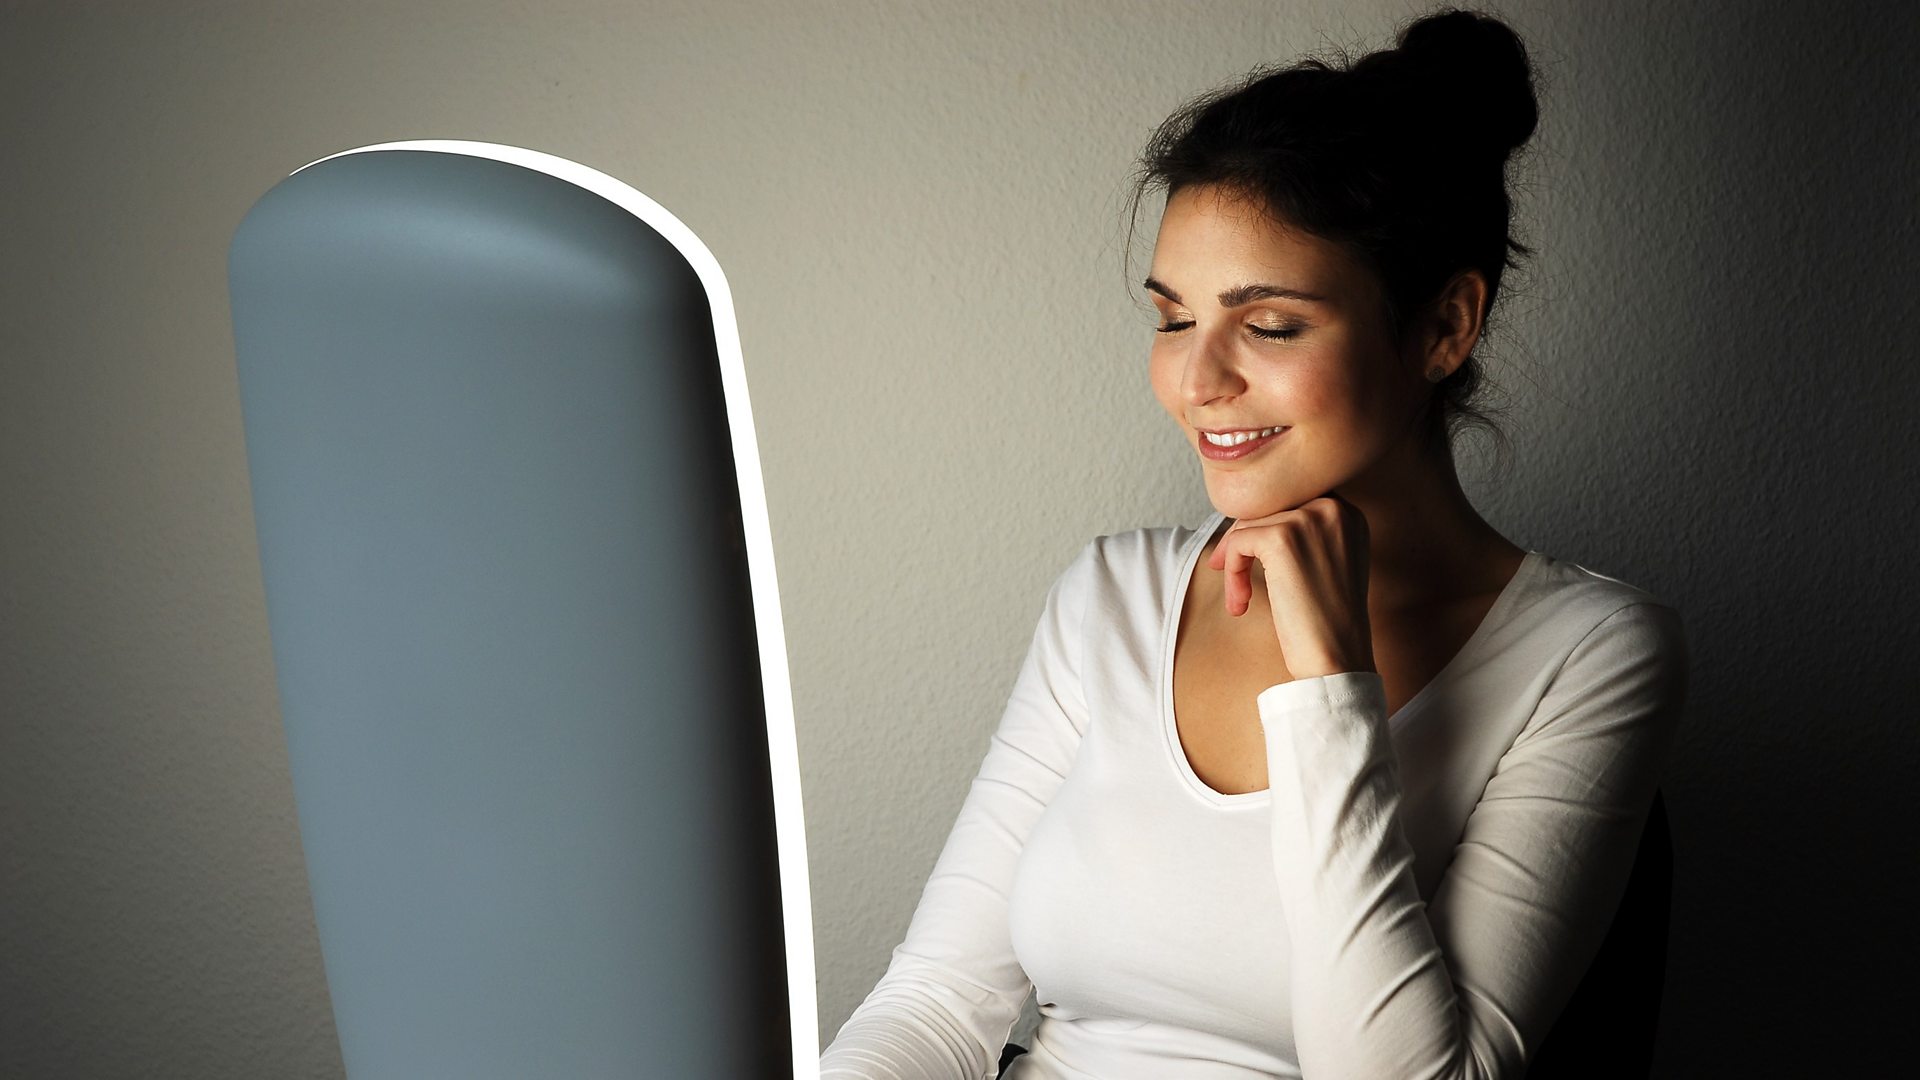 4 - Sliced Bread, Wake Up Lights & Lamps - Can lamps and wake-up lights help boost your mood?